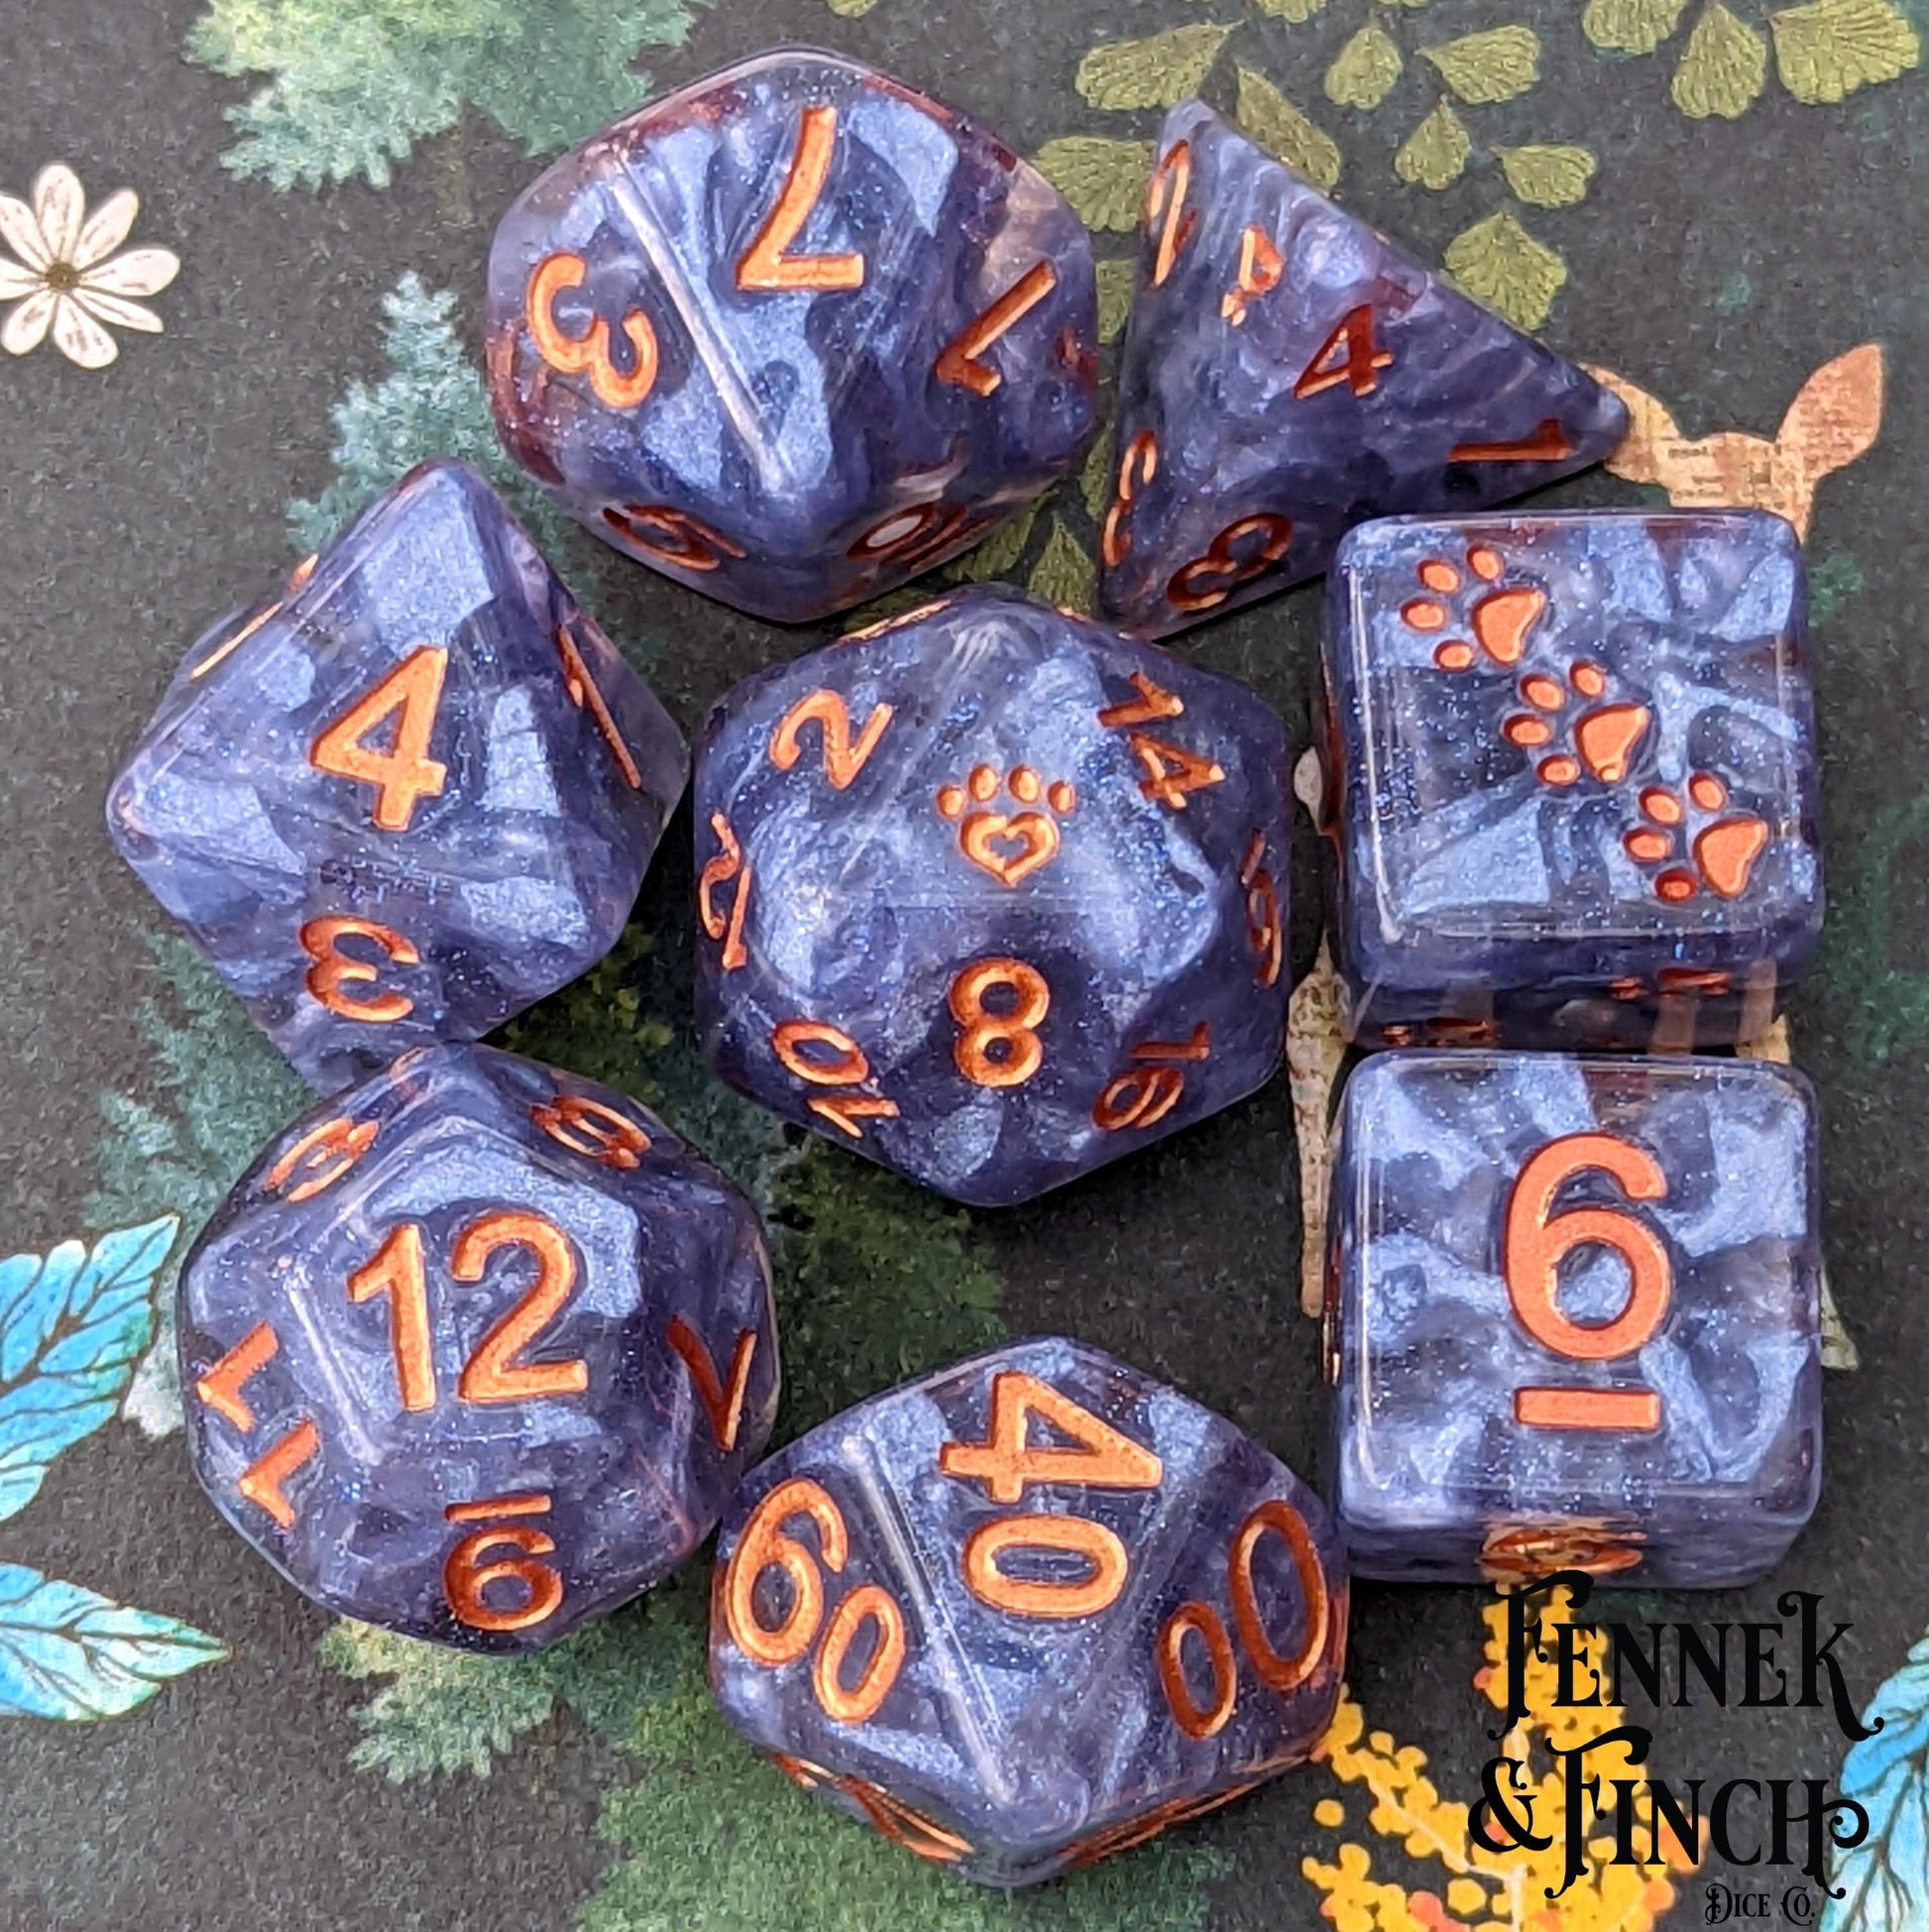 Ceanothus 8 Piece Dice Set. Clear resin with pearly blue violet clouds and copper font.